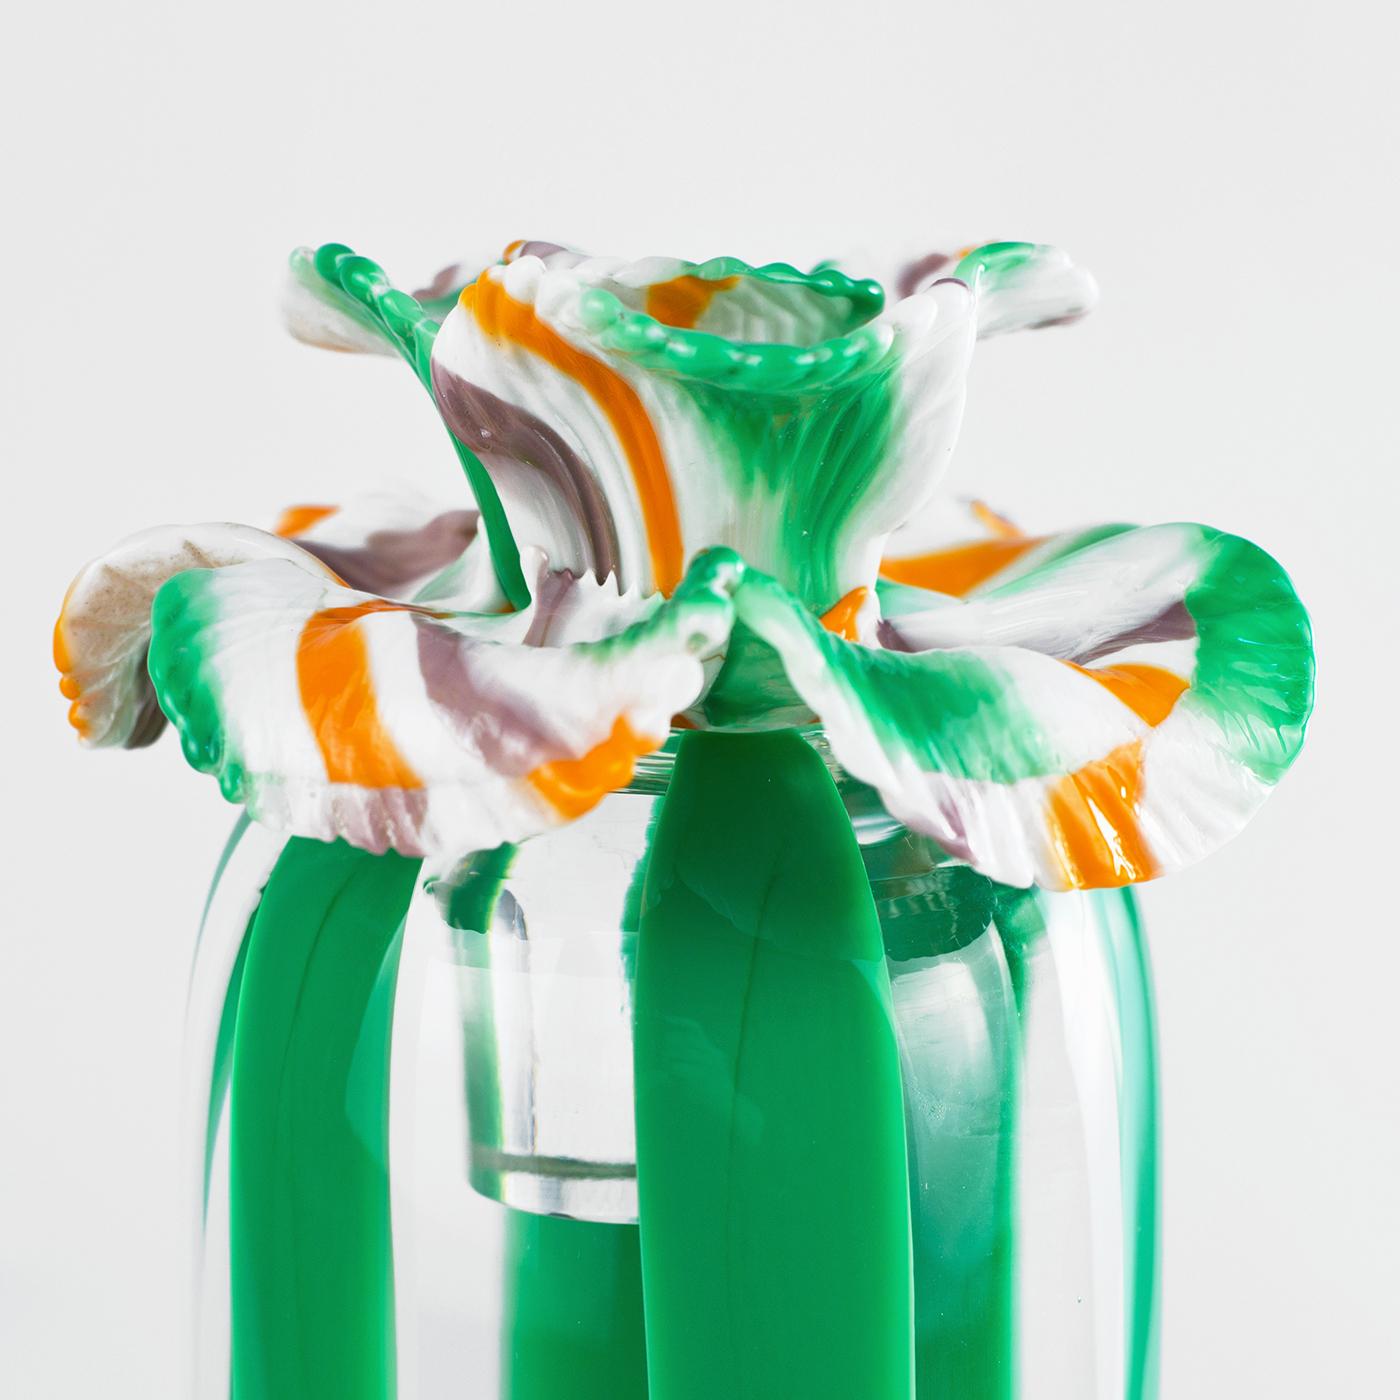 From the Rigadoni collection, this sculpture is characterized by bright green vertical stripes on transparent glass. Closing the vase is a Torcelo flower, crafted in white, coral, green and mauve stripes. Strictly decorative, the piece perfectly